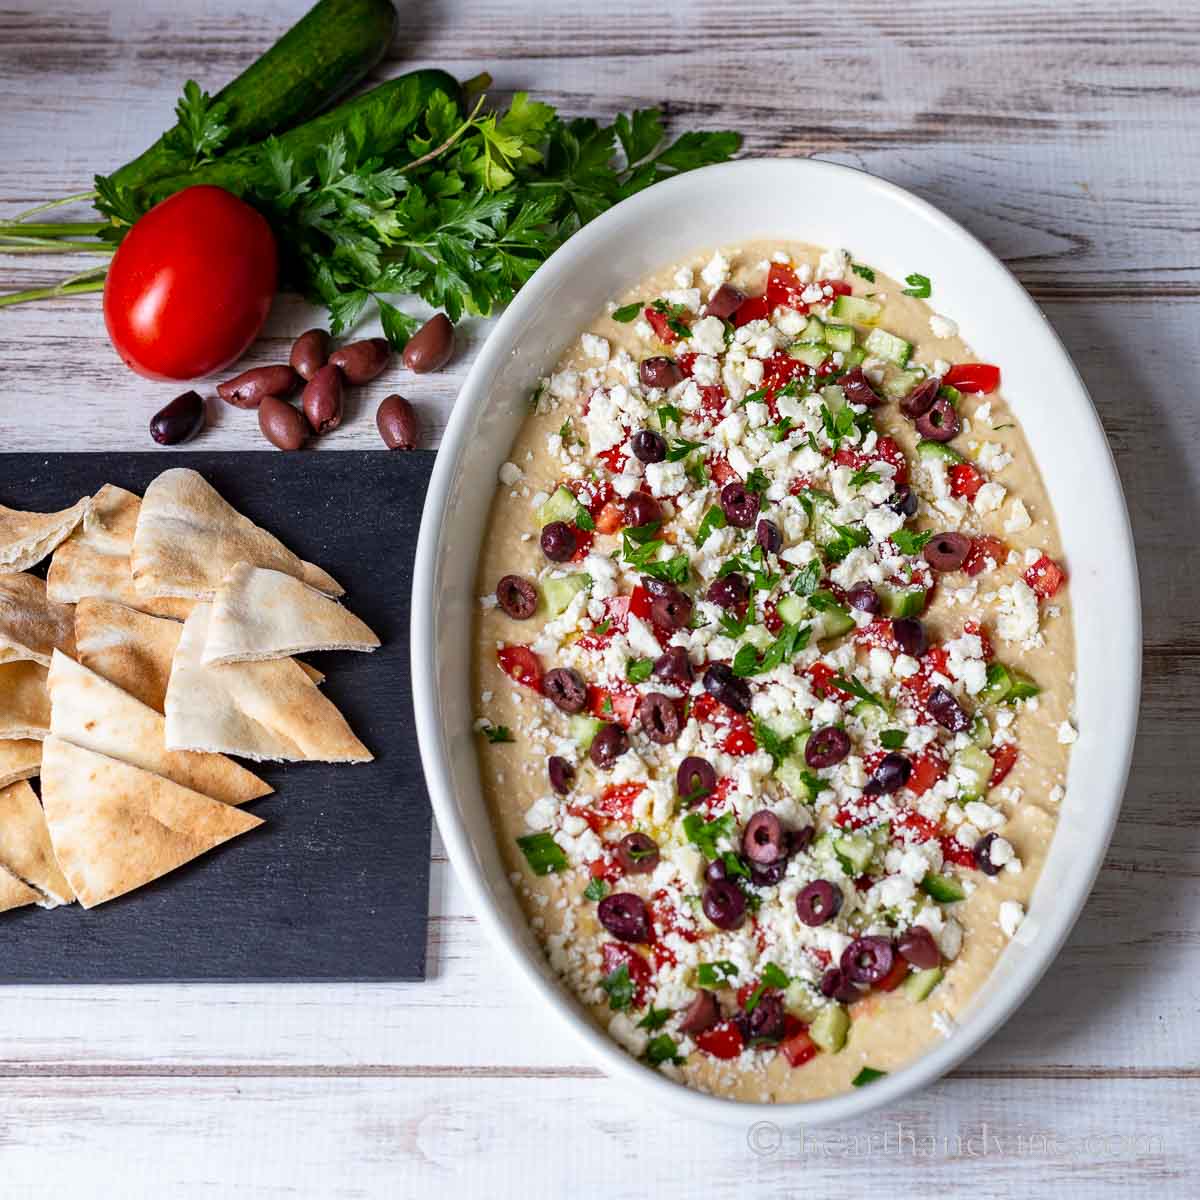 Oval serving dish with Greek layered hummus next to pita wedges, olives, tomato, cucumber, and parsley.